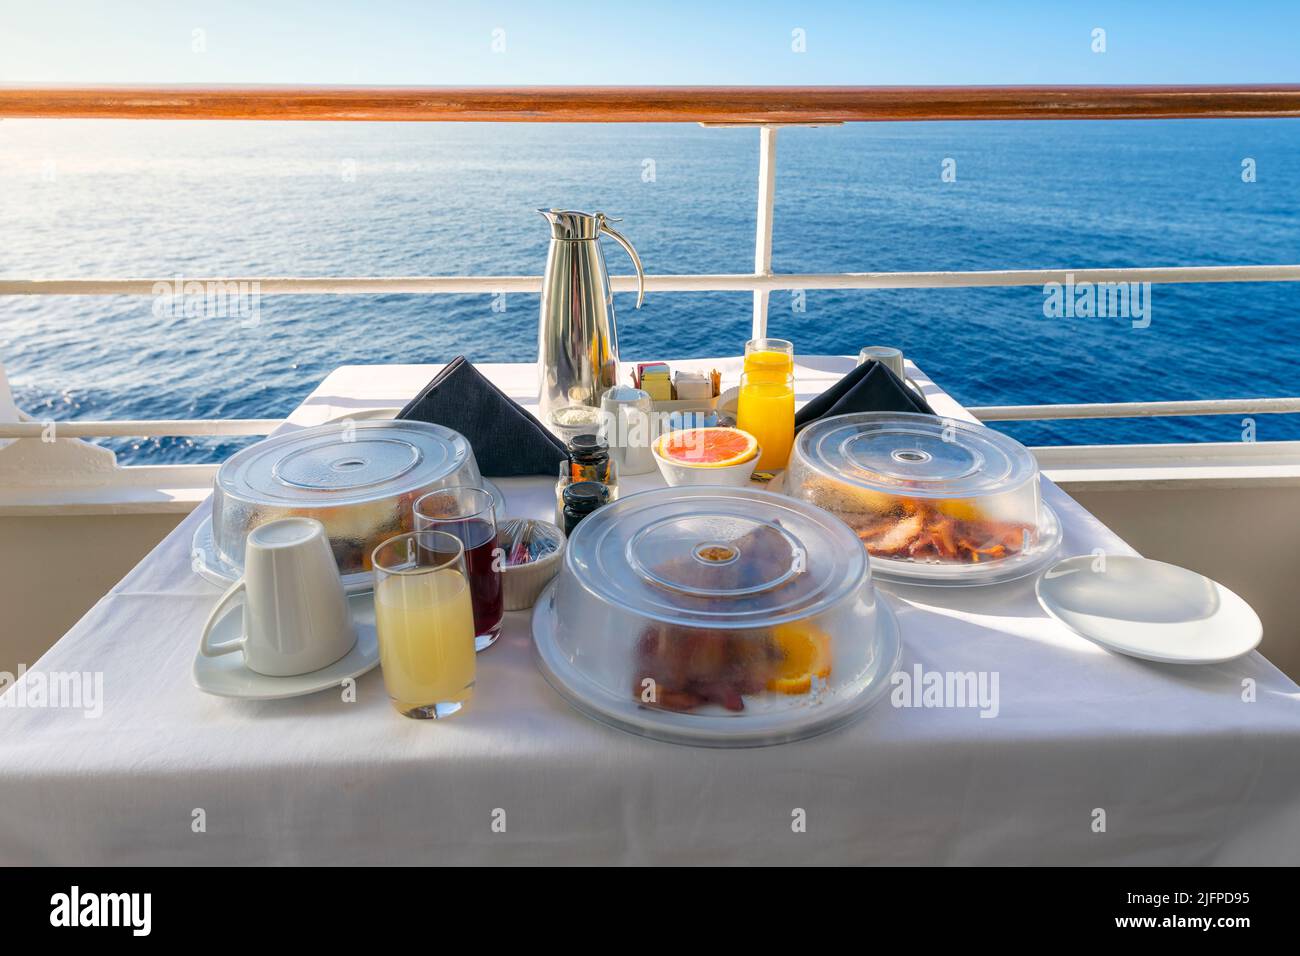 A full room service breakfast on a balcony of a cruise ship cabin at sea including juice, coffee and full meals on a sunny luxury vacation on the sea. Stock Photo